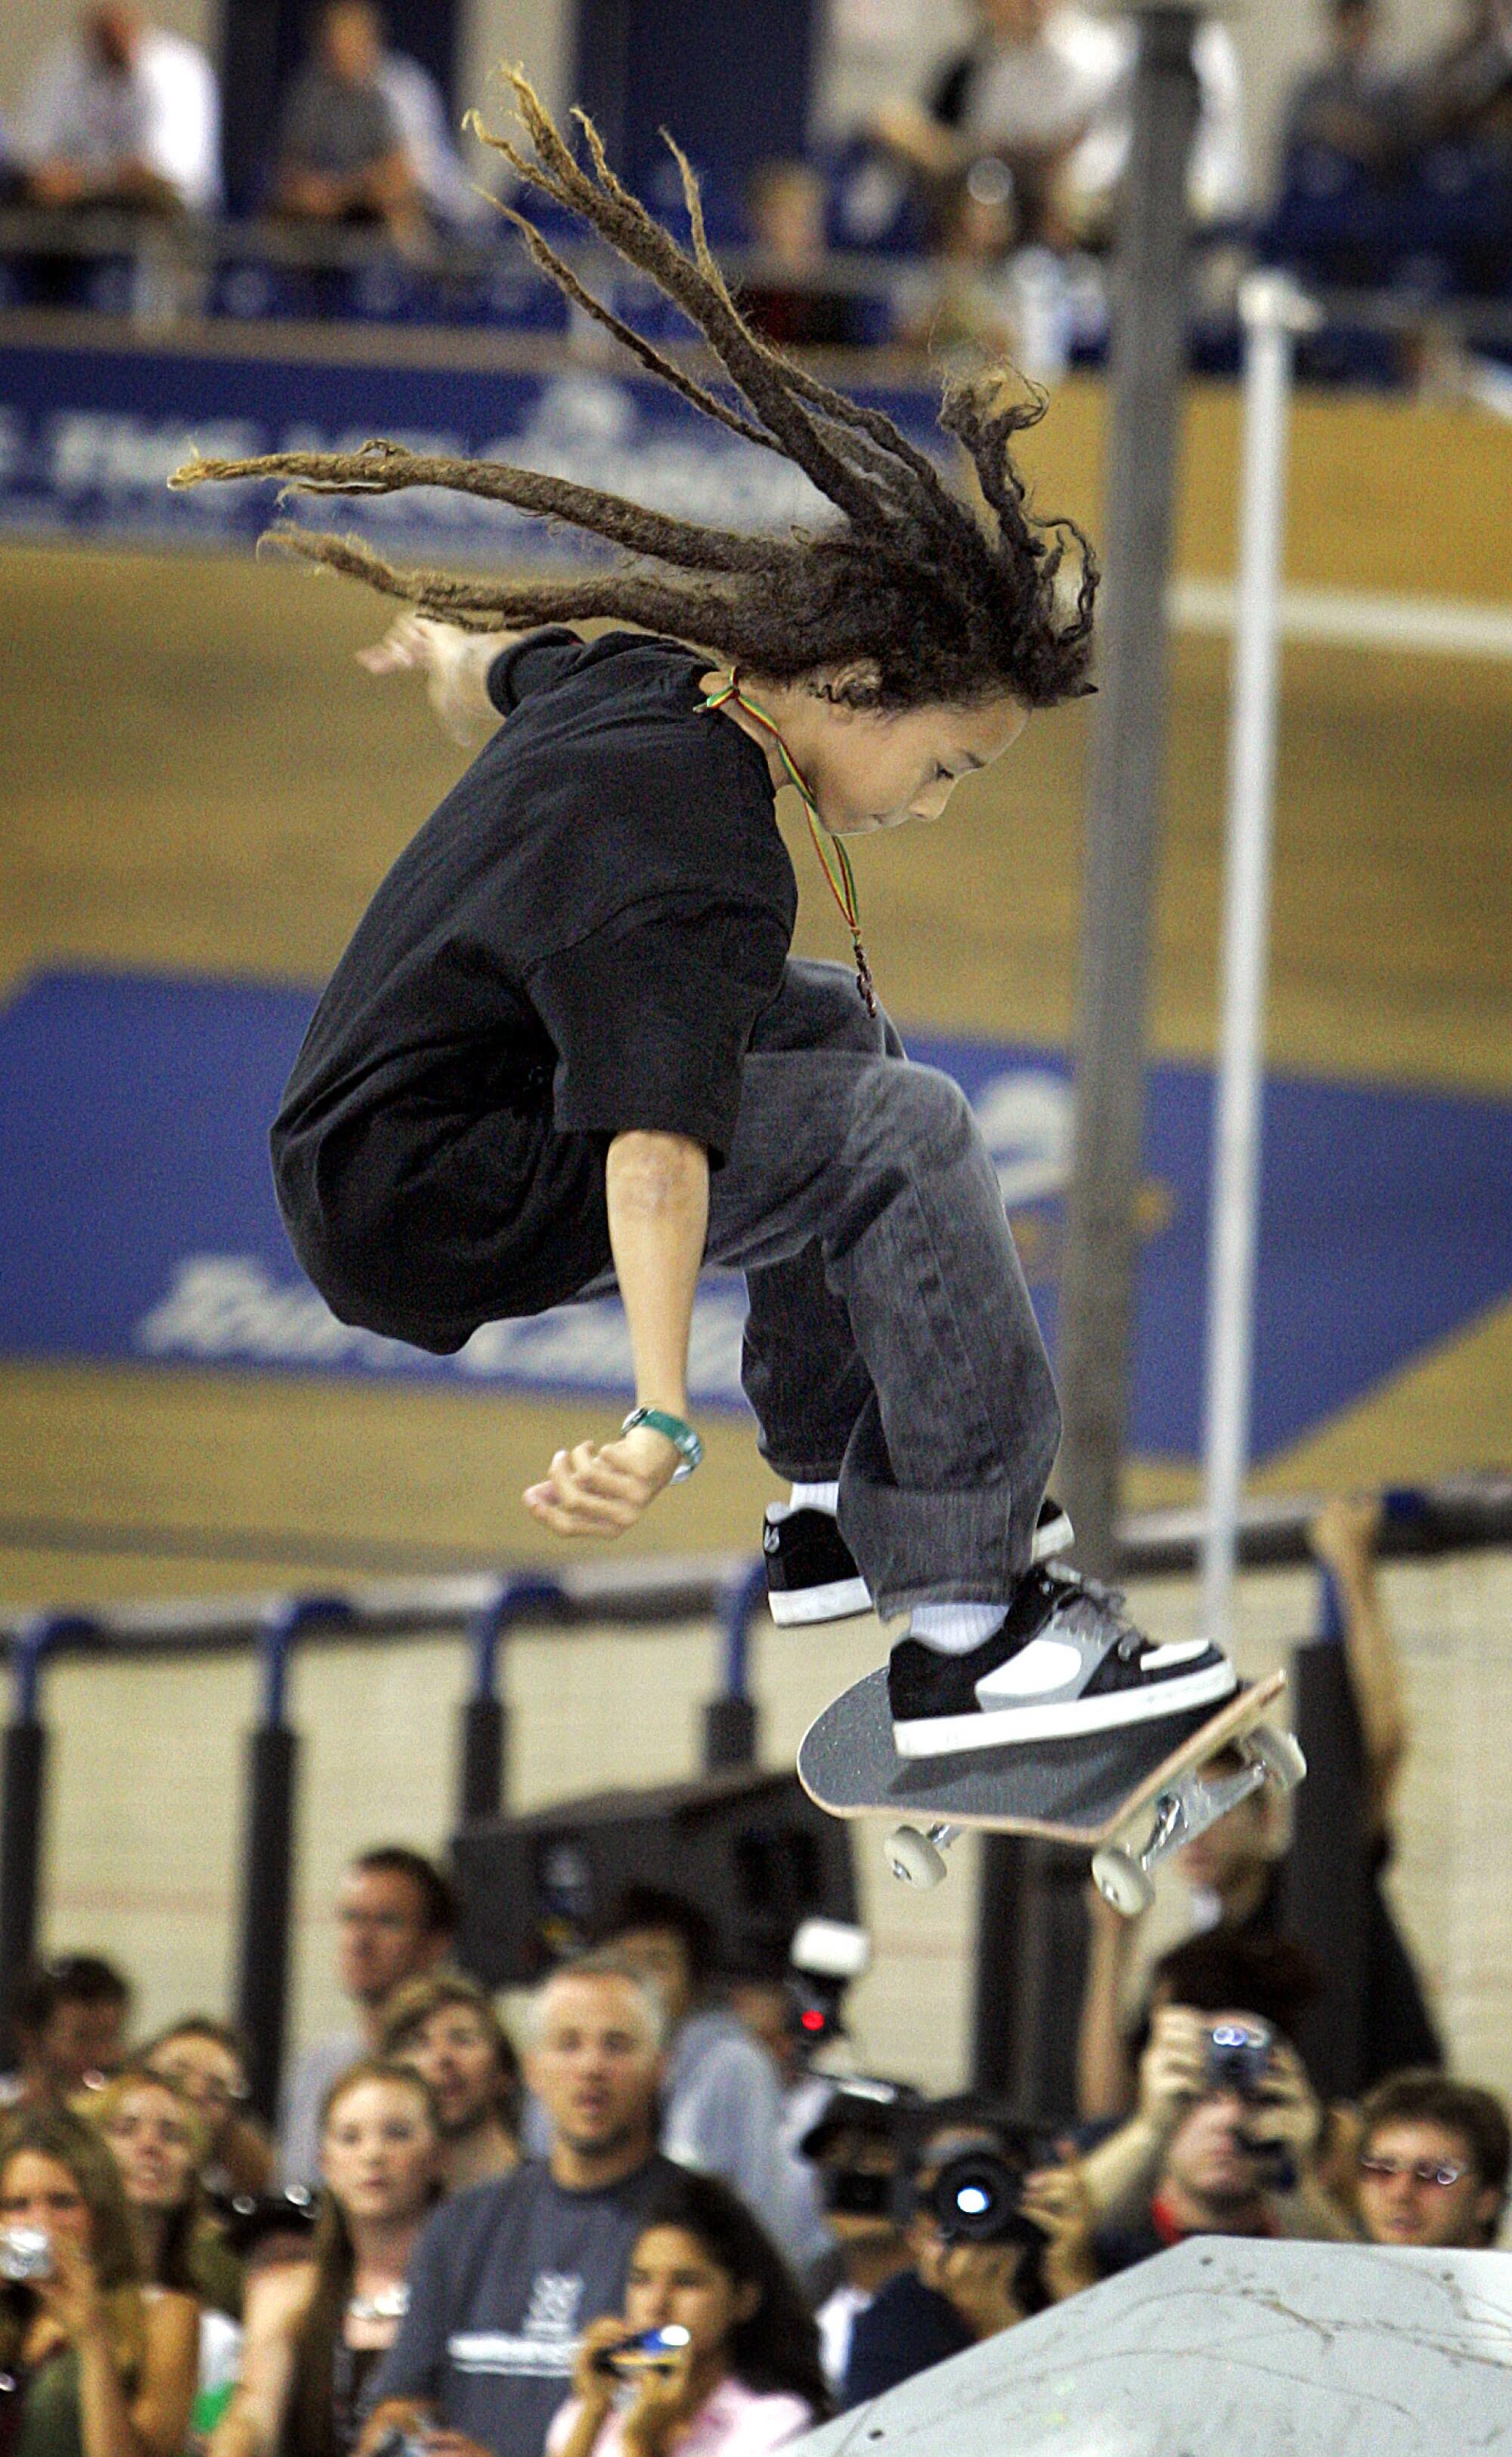 Nyjah Huston, of Davis, Calif., at age 11 the youngest X Game competitor ever